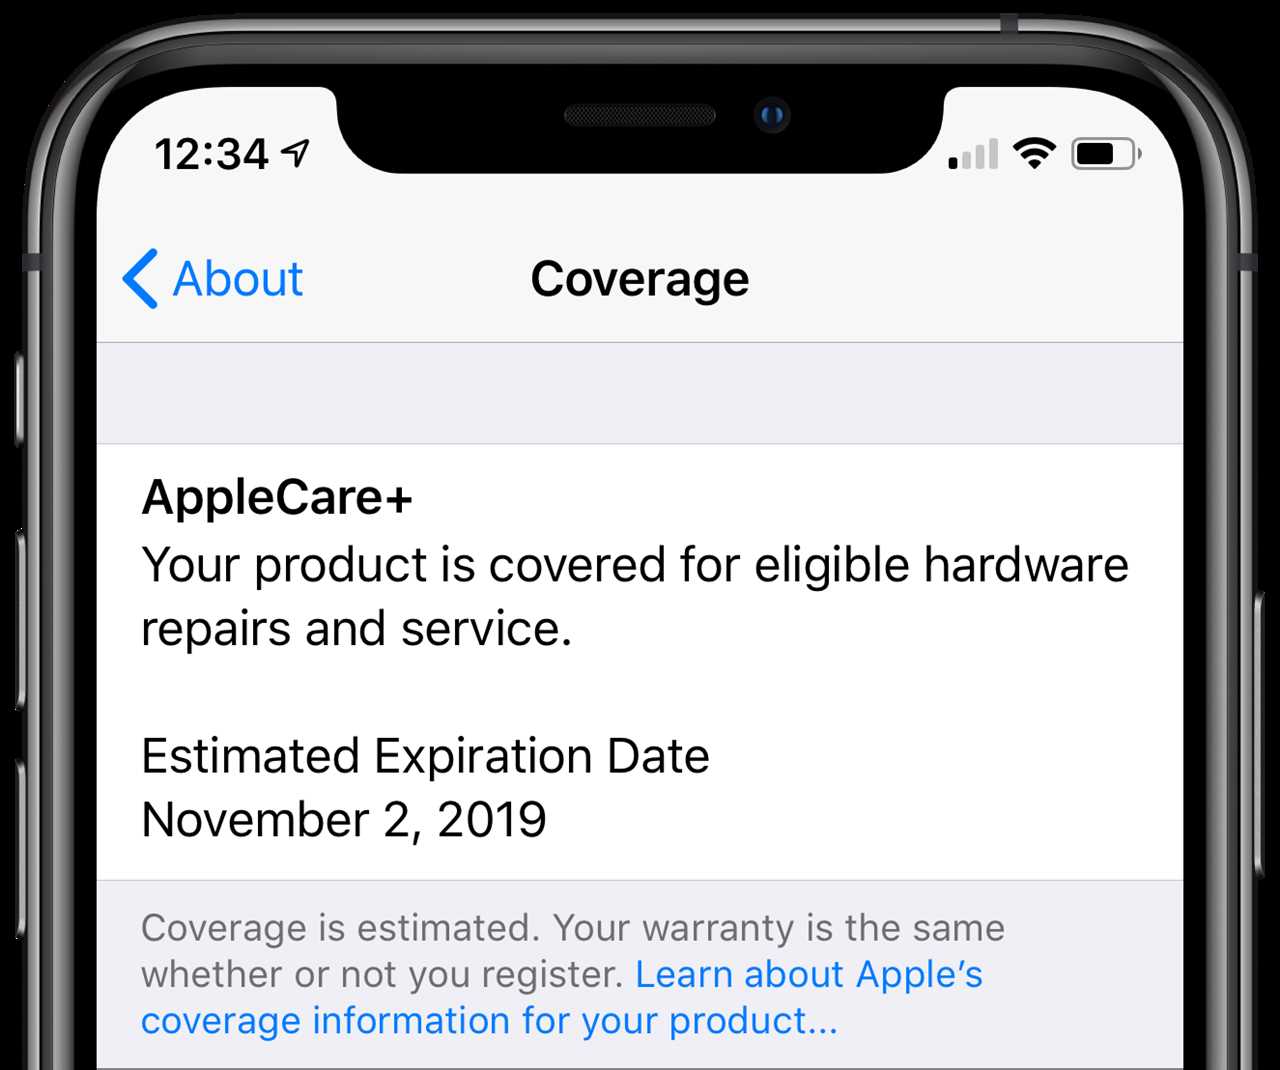 What does AppleCare cover?